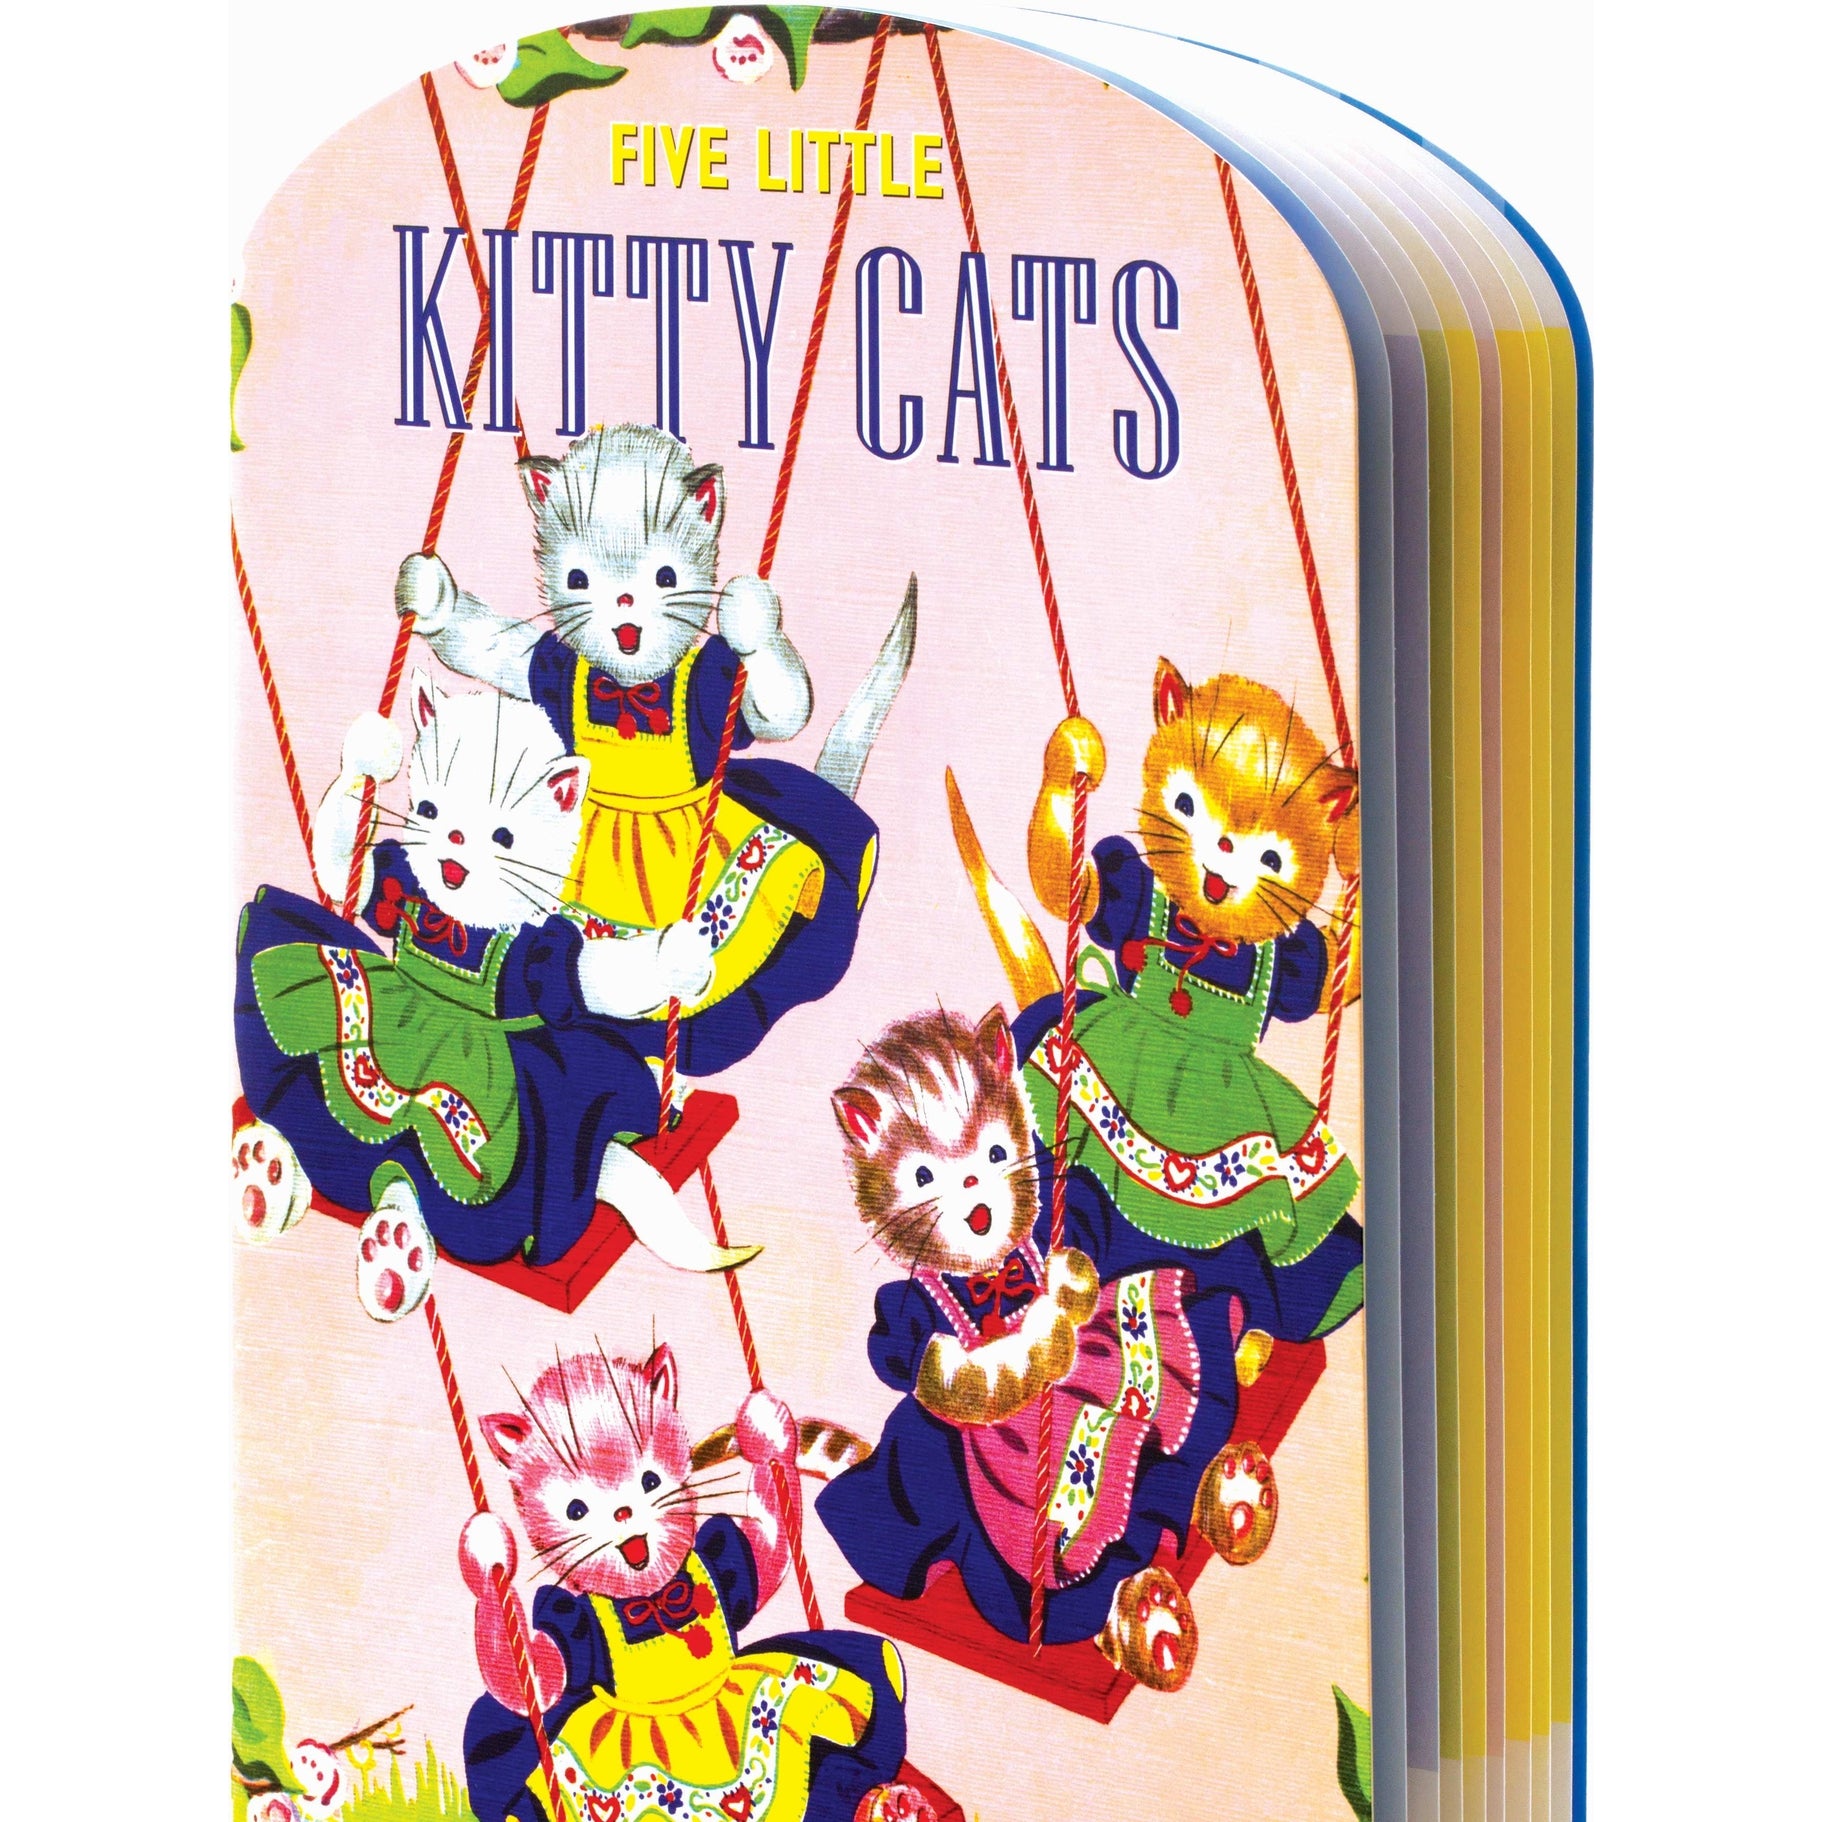 Five Little Kitty Cats Vintage Picture Book